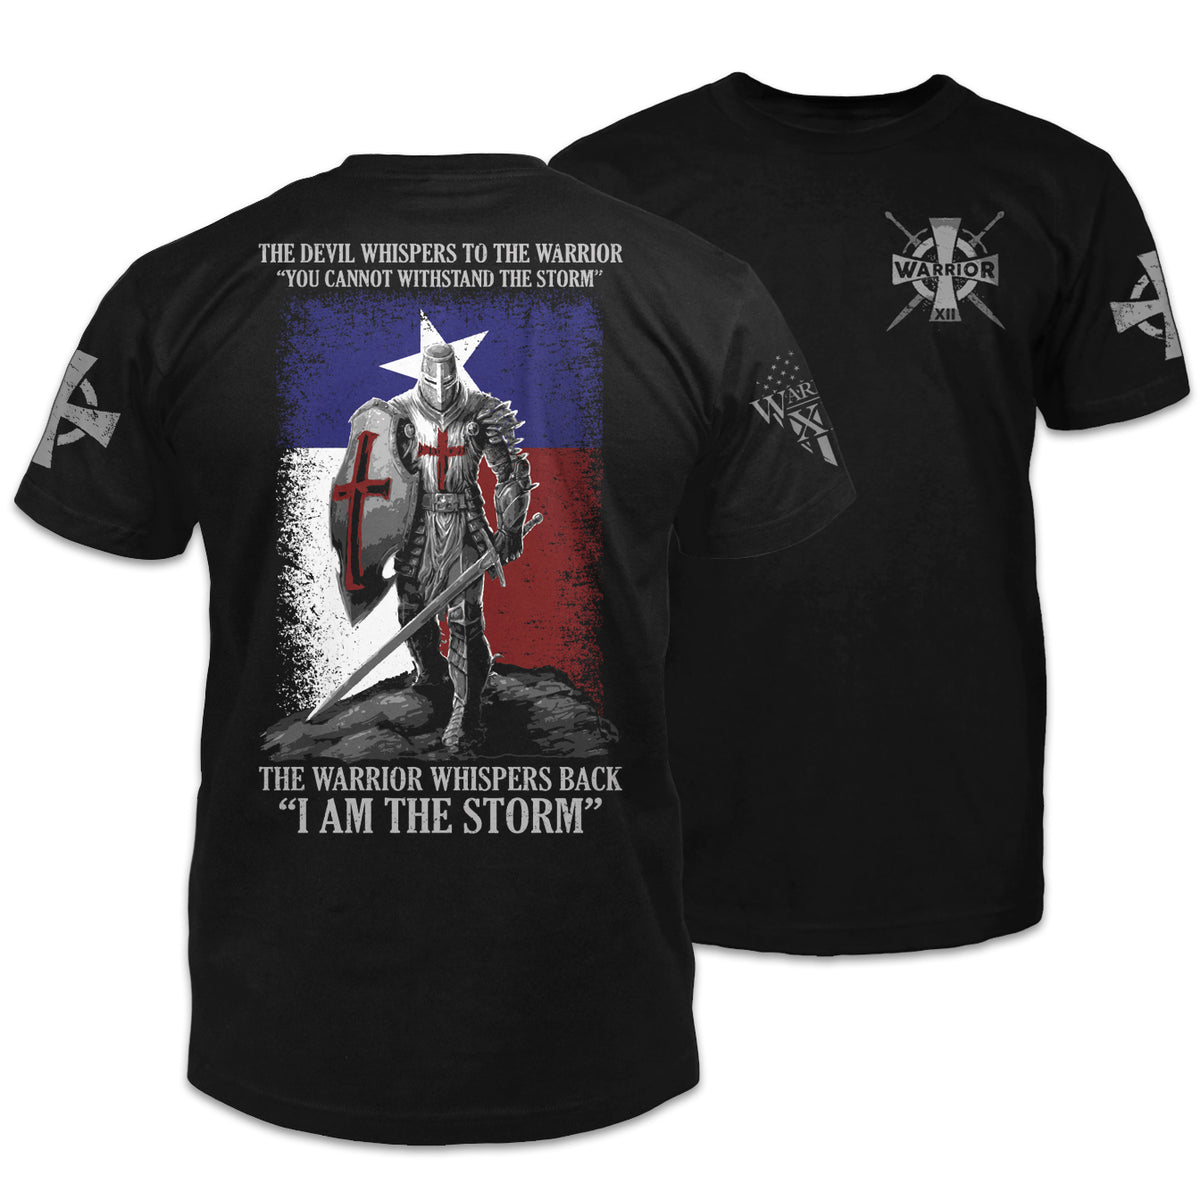 Front and back black t-shirt with the words "The Devil whispers to the Warrior, "You cannot withstand the storm." The Warrior whispers back‚ "I am the storm." with a warrior printed on the shirt.